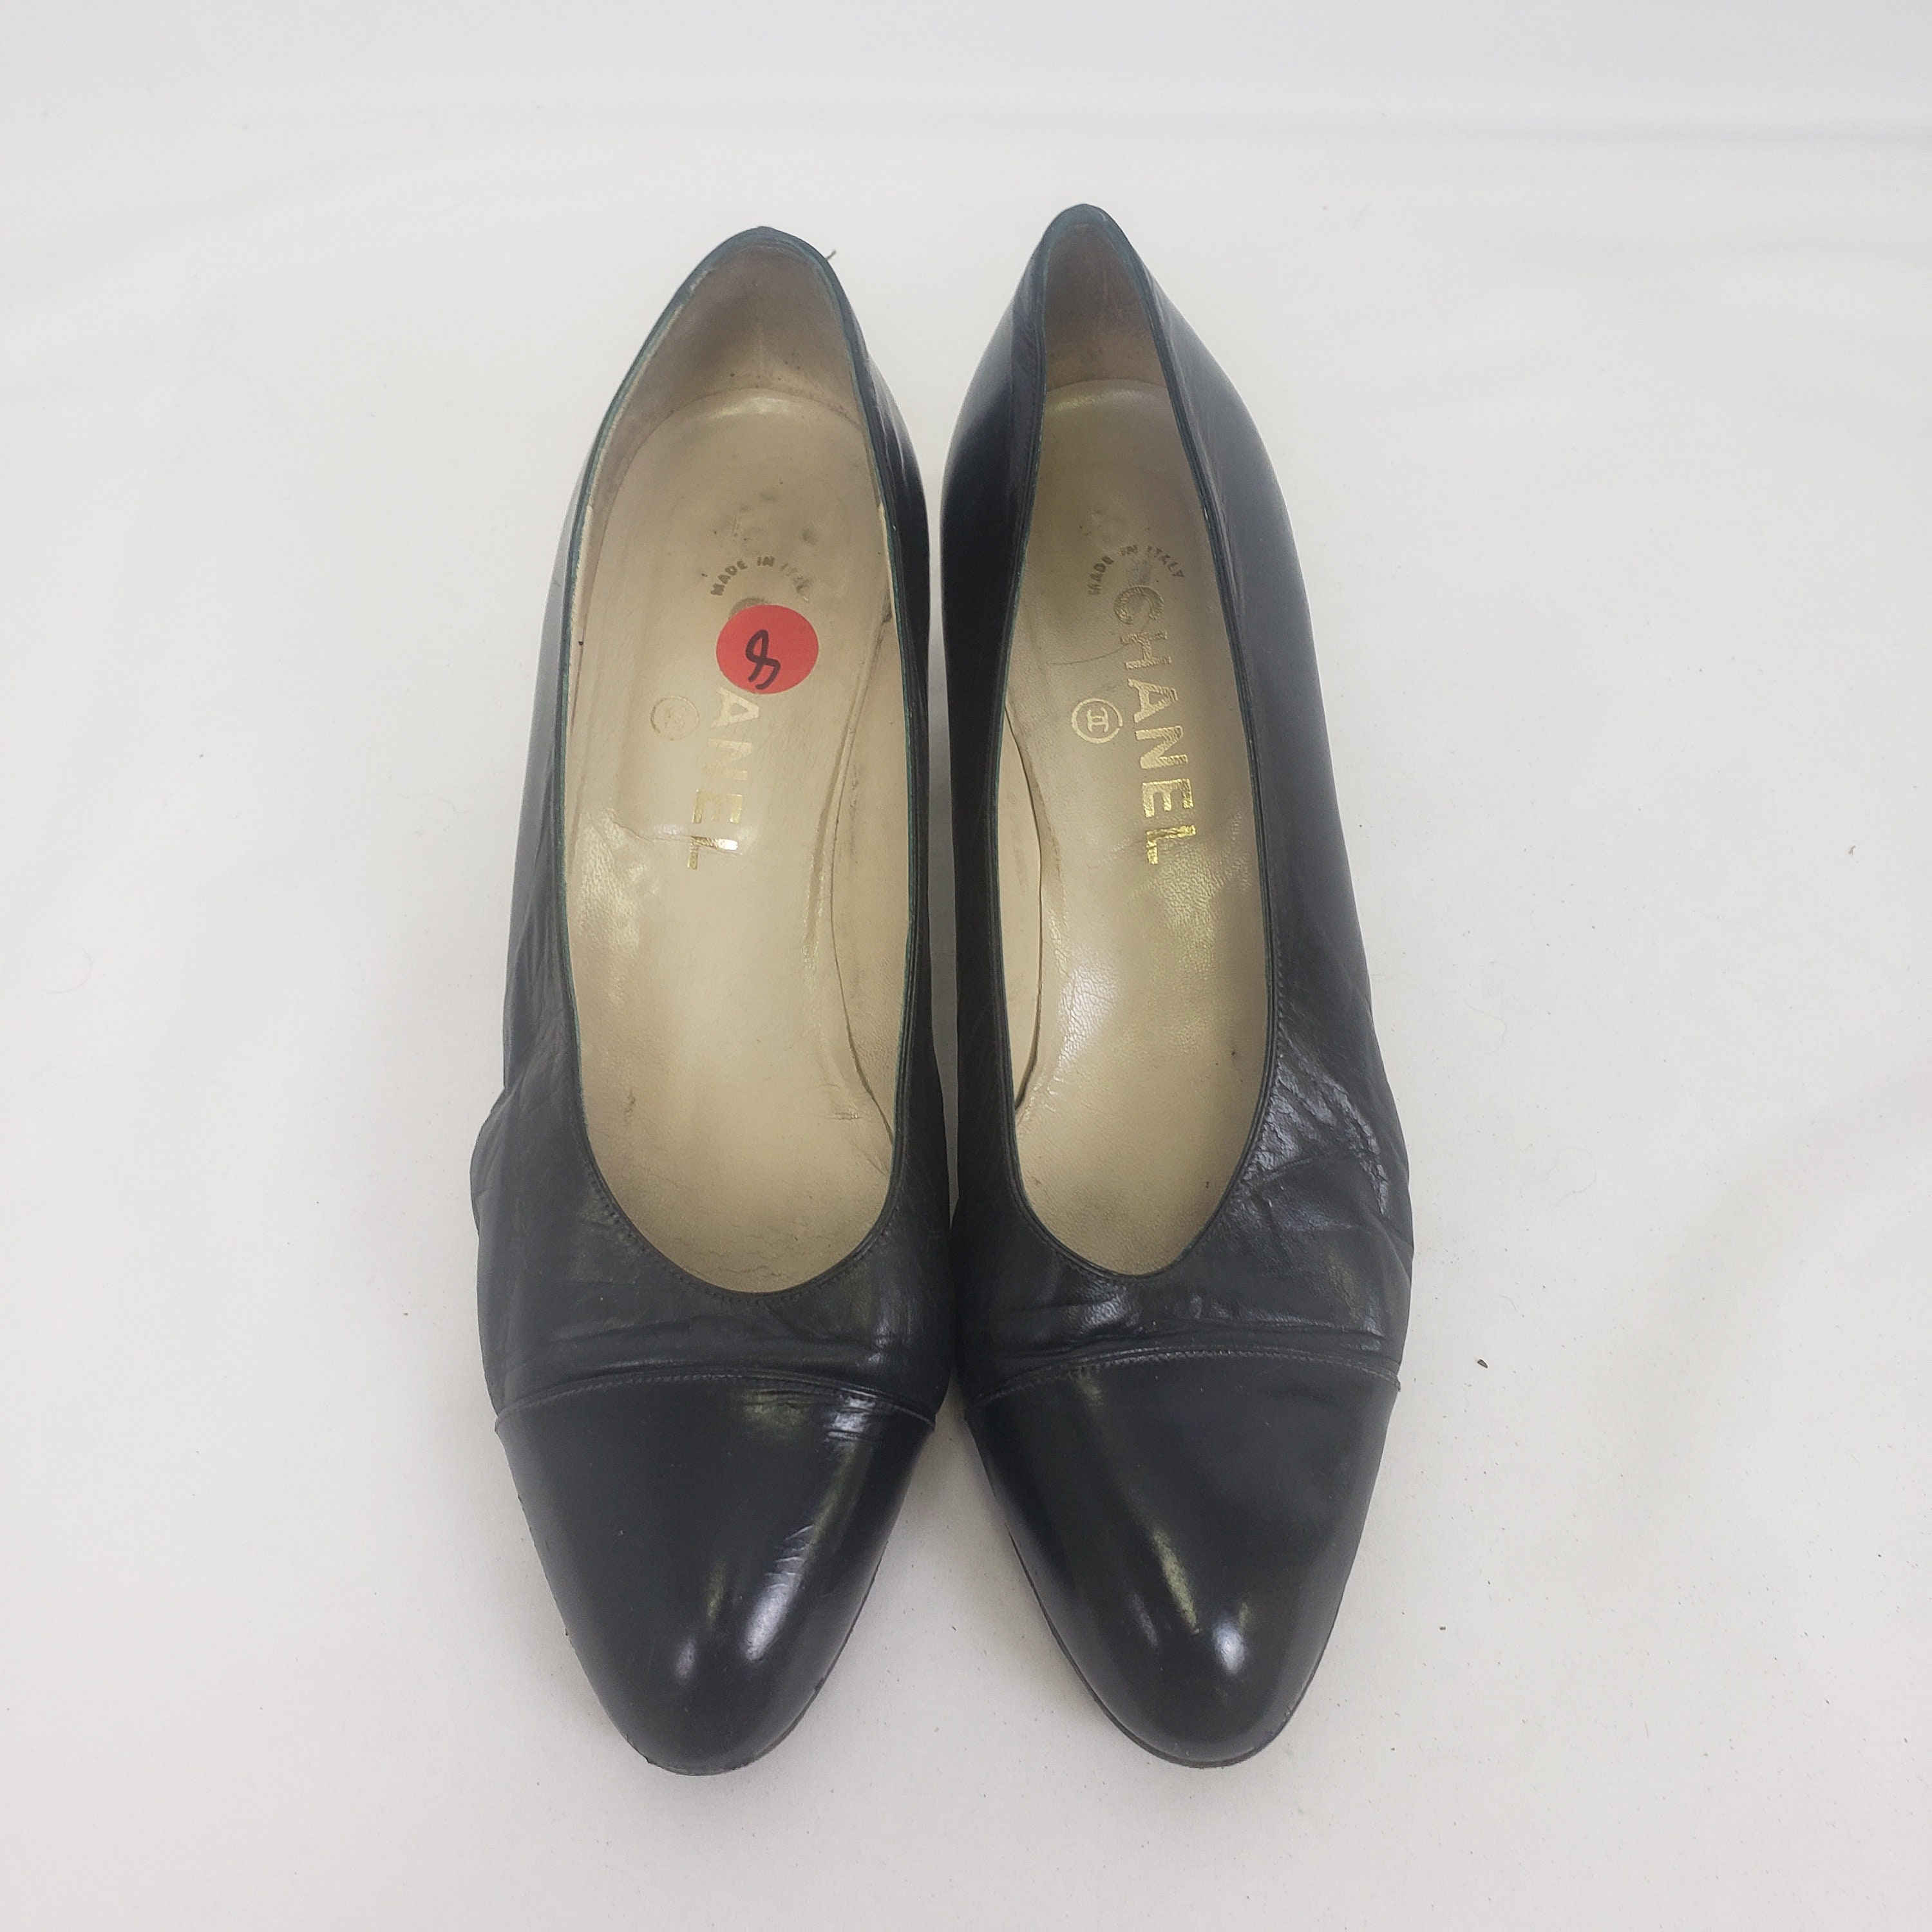 Cambon leather ballet flats Chanel Black size 3.5 UK in Leather